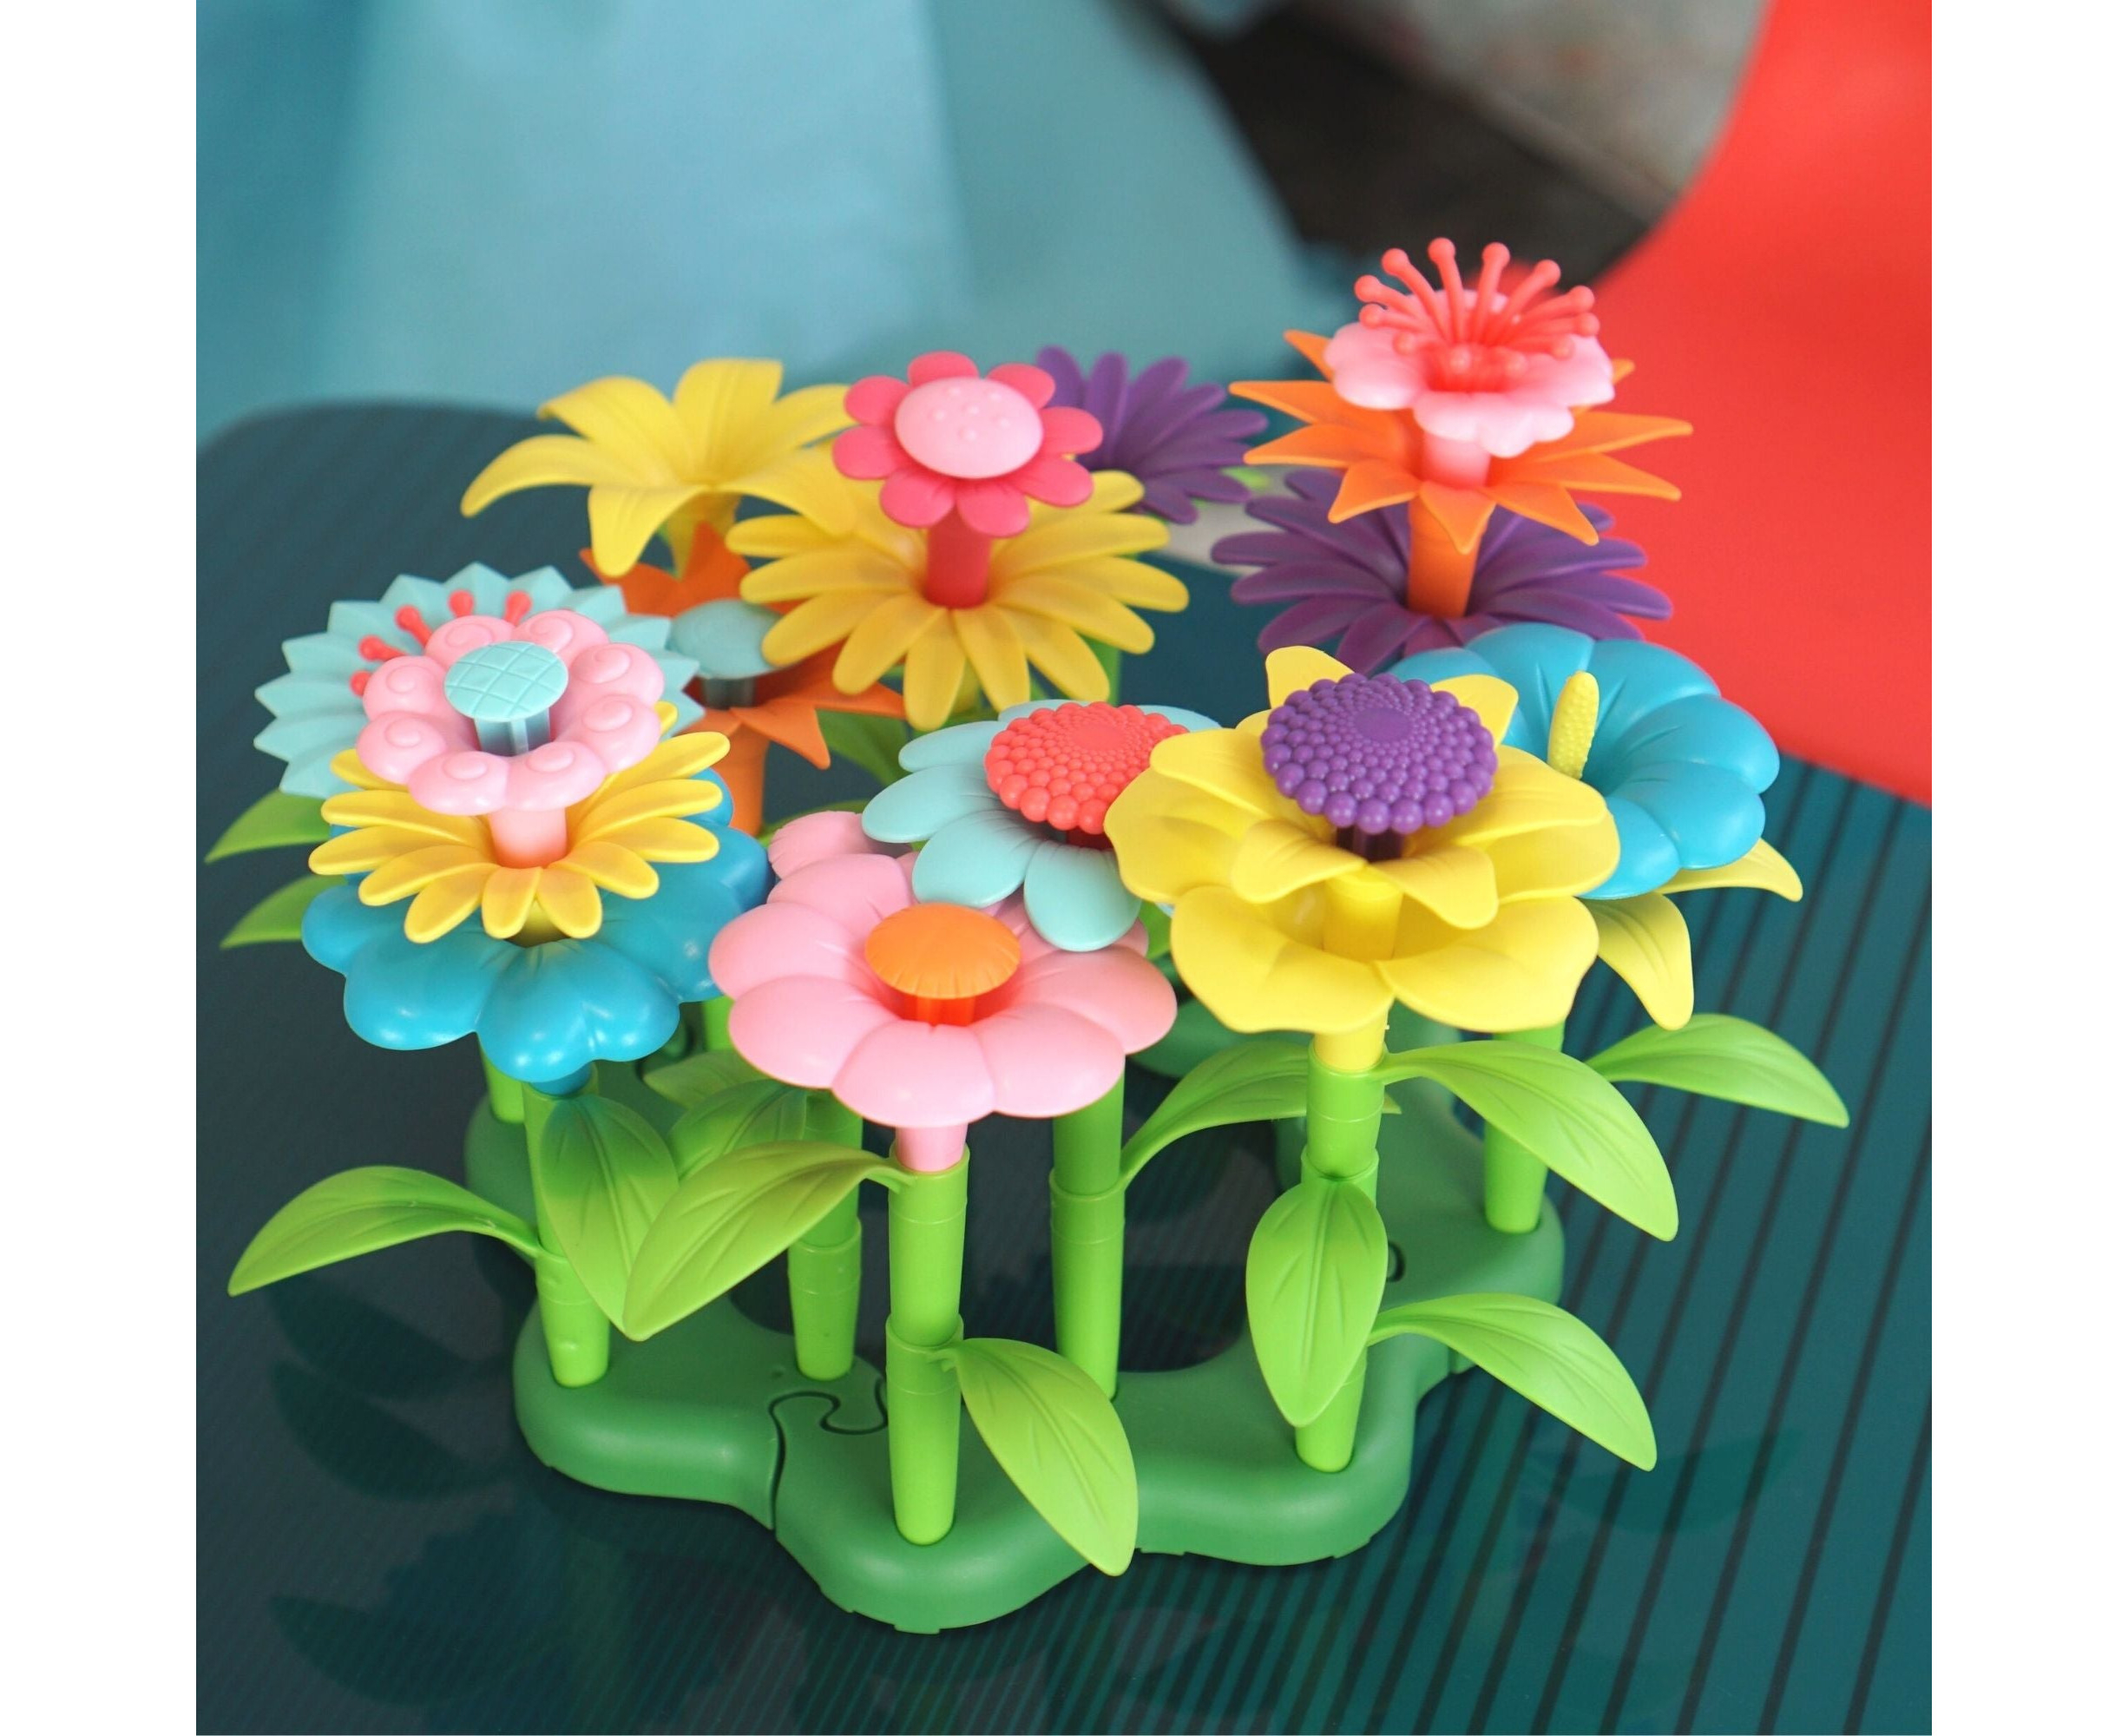 Build a Bouquet Floral Arrangement Creative Educational Colorful 98 PCS Blocks Toy For 3 4 5 6 Years Old Girls Kids Pretend Christmas Birthdays Gifts Flower Building Garden Playsets Toys 